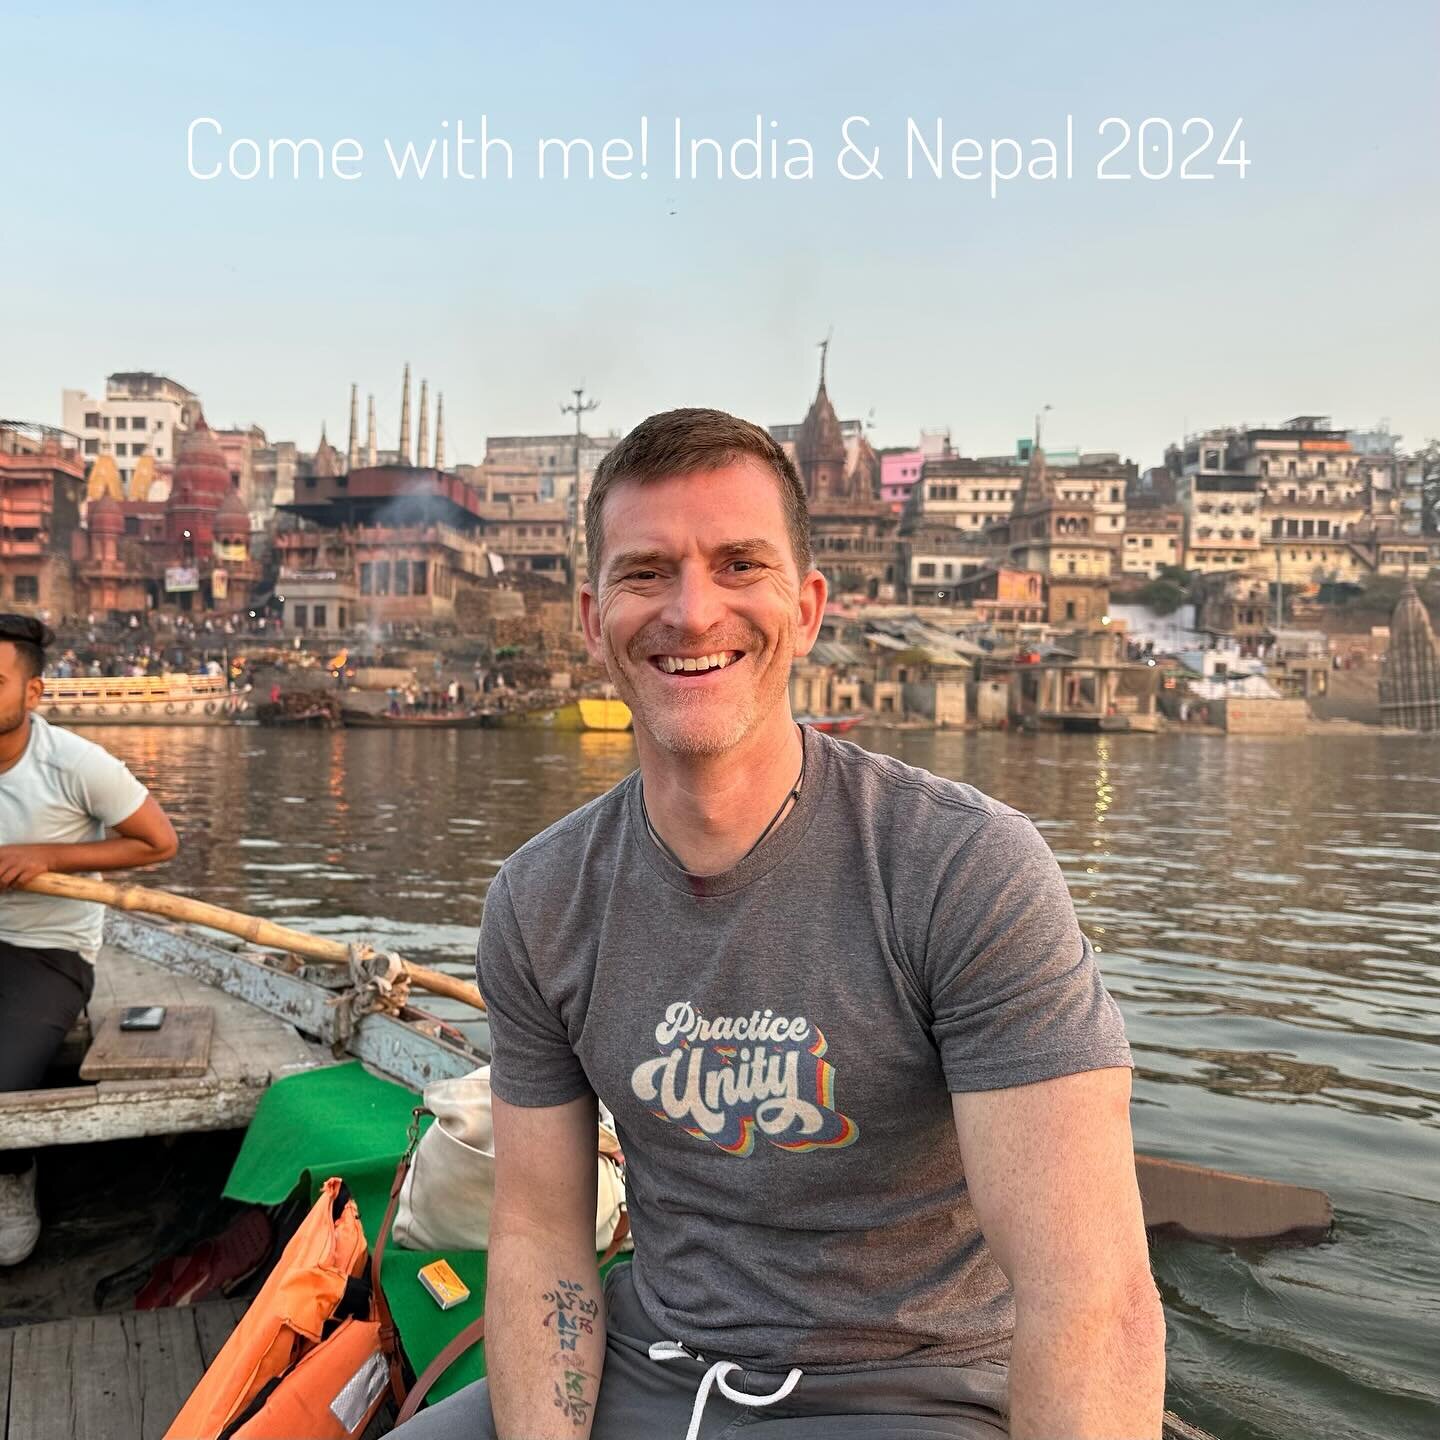 Check out these awesome trips we have planned for Oct 2024 💥. 8 days exploring the Kathmandu Valley &mdash; followed by a 12-day pilgrimage to the most sacred sites of Buddhism. Yoga, meditation, Buddhism, hiking, and adventure at every turn! Join u